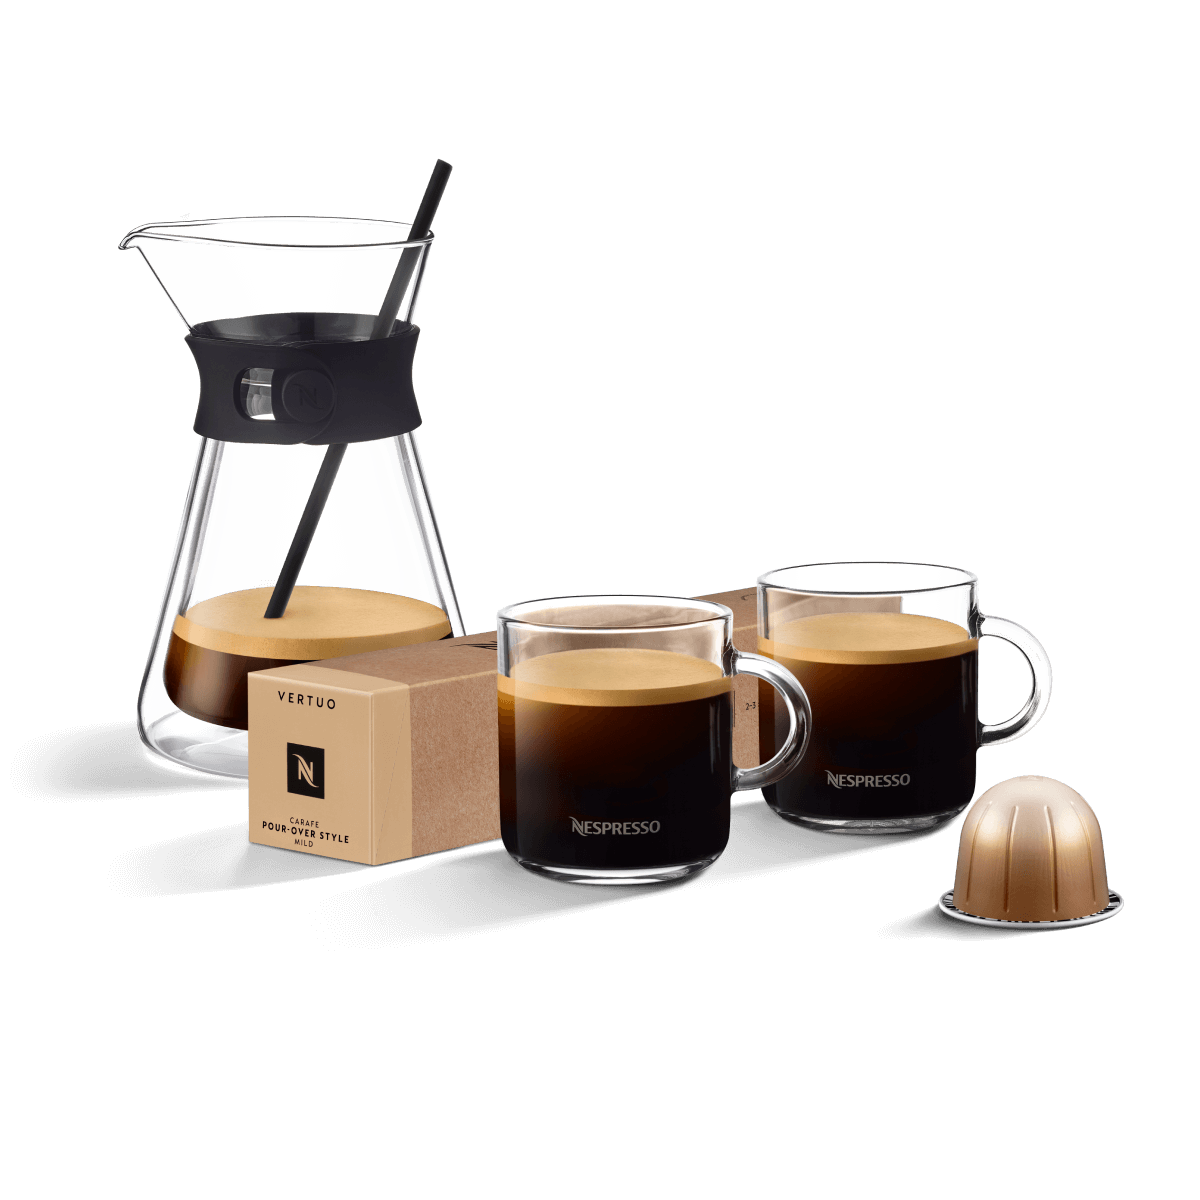 https://www.nespresso.com/shared_res/agility/global/coffees/vl/sku-main-info-product/carafe-pour-over-style-mild_2x.png